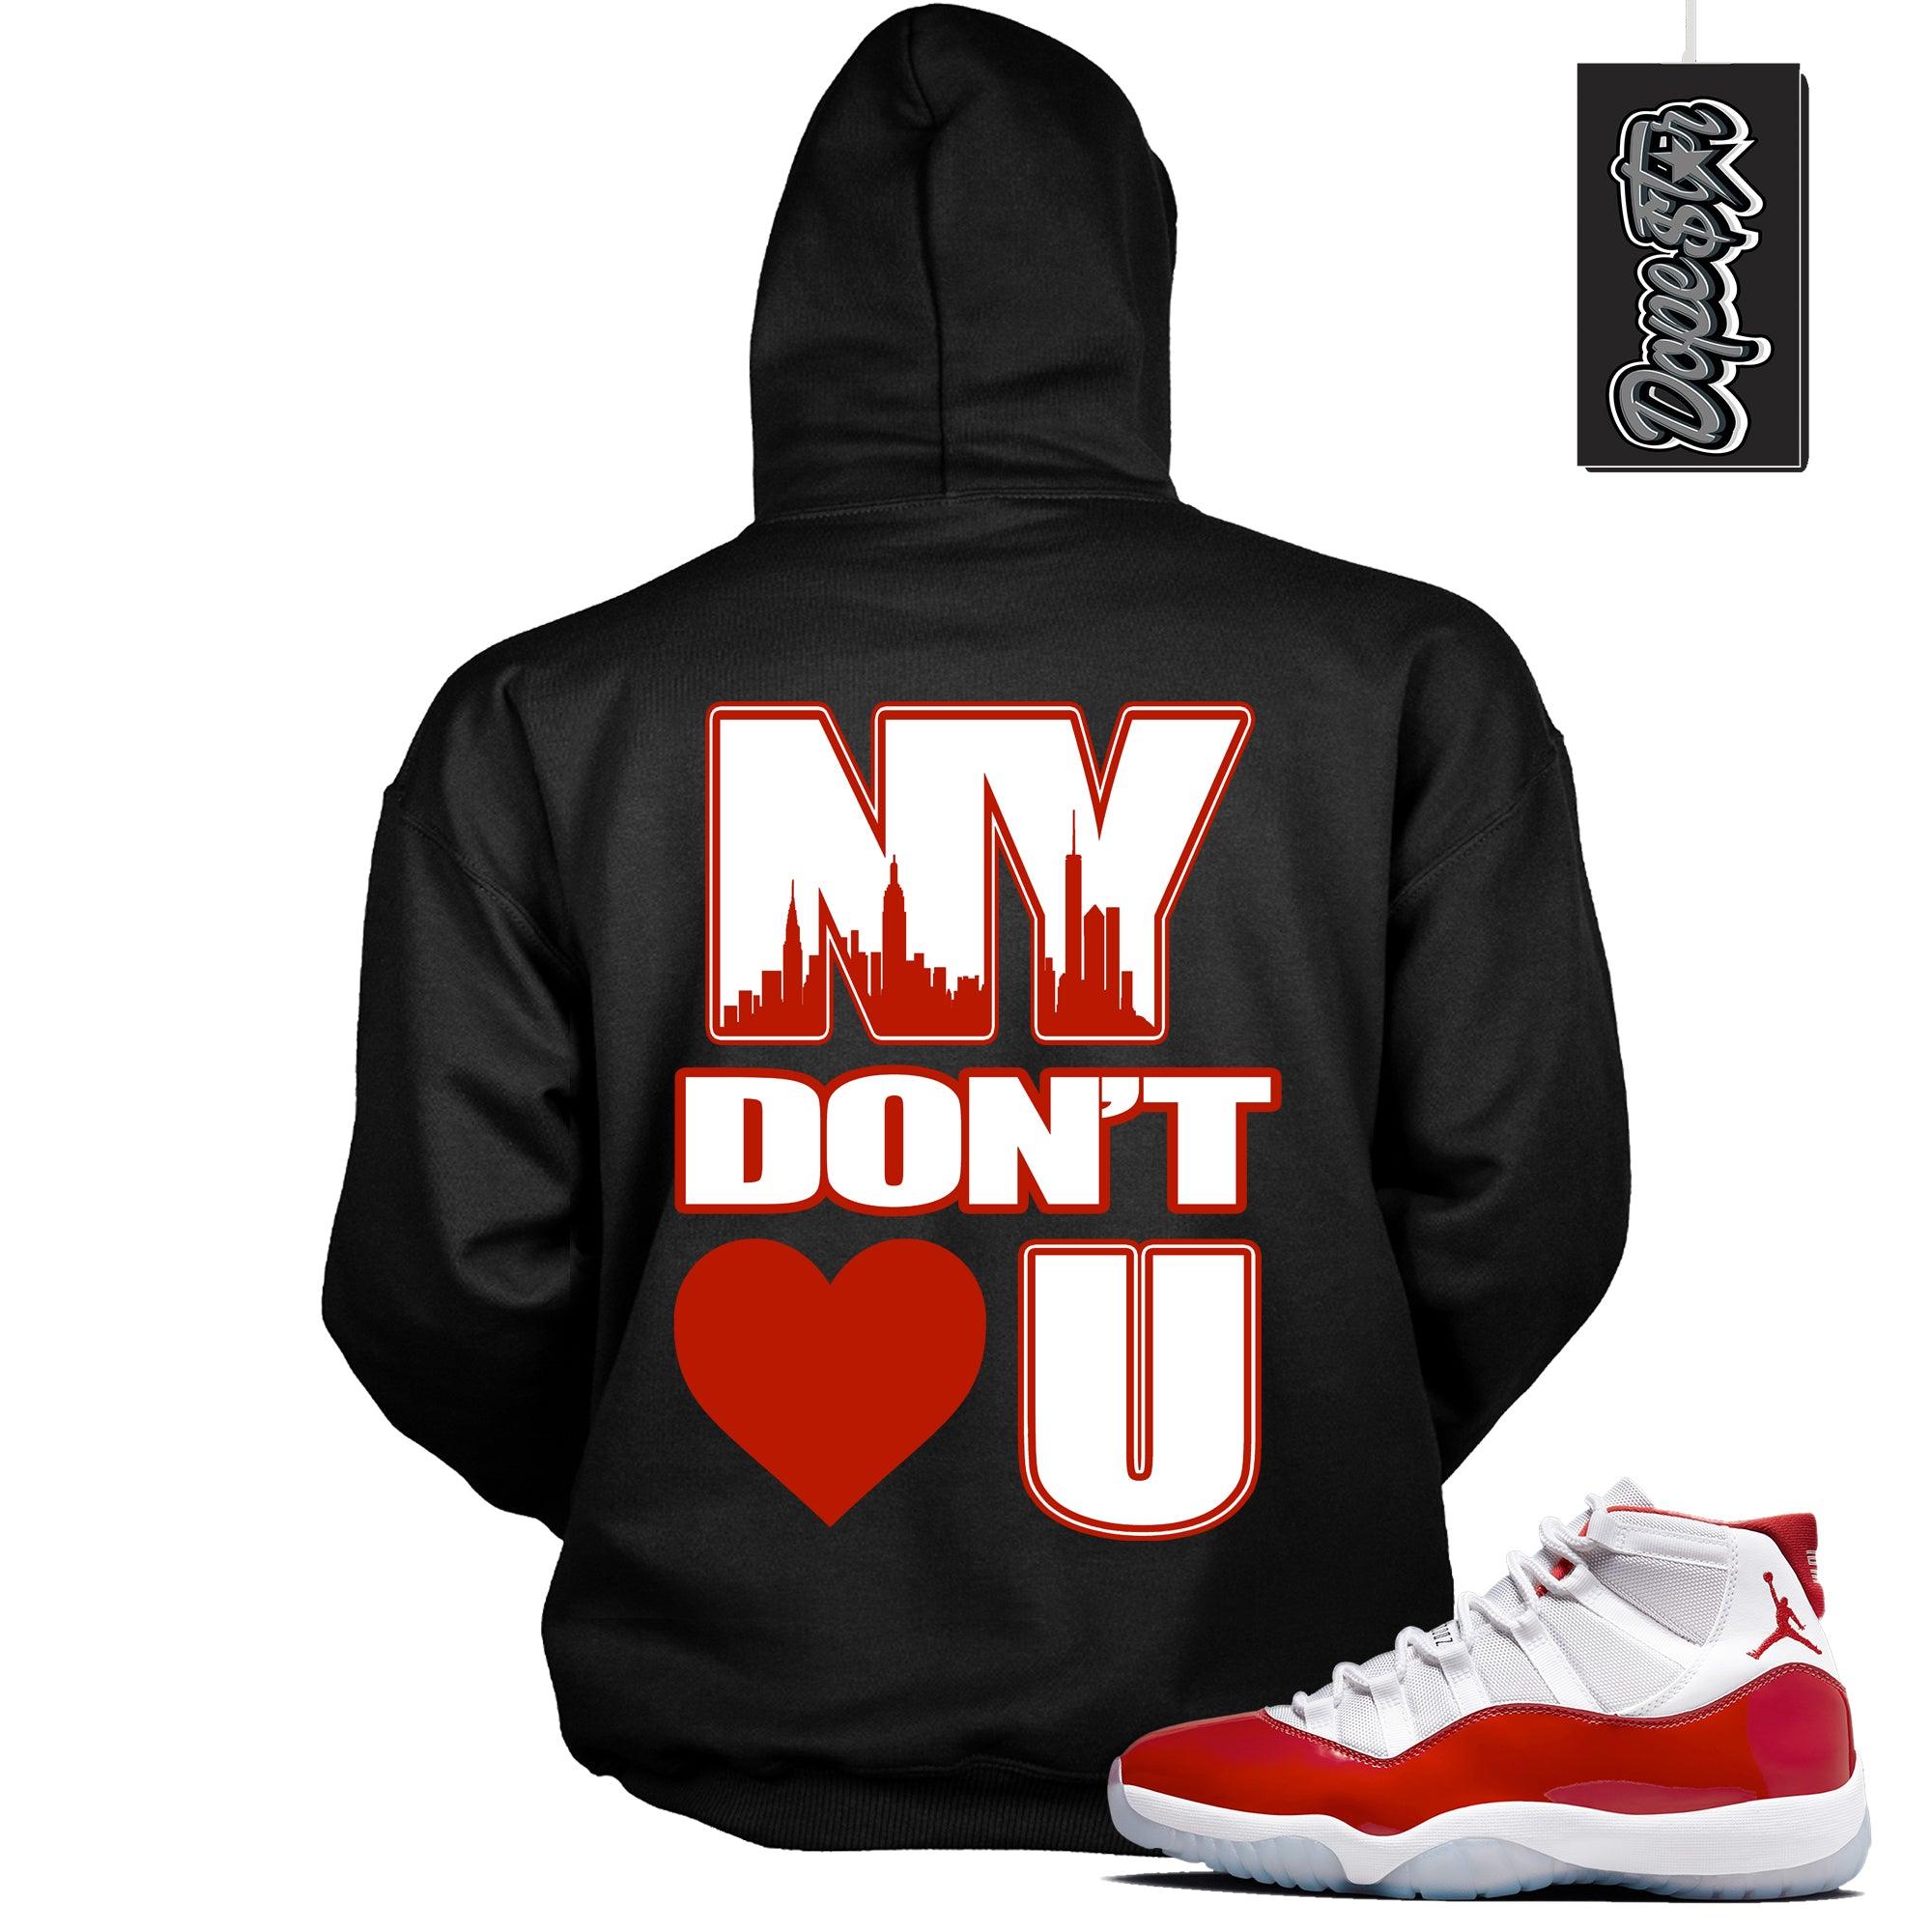 Cool Black Graphic Hoodie with “ NY Don’t Love U “ print, that perfectly matches Air Jordan 11 Cherry sneakers